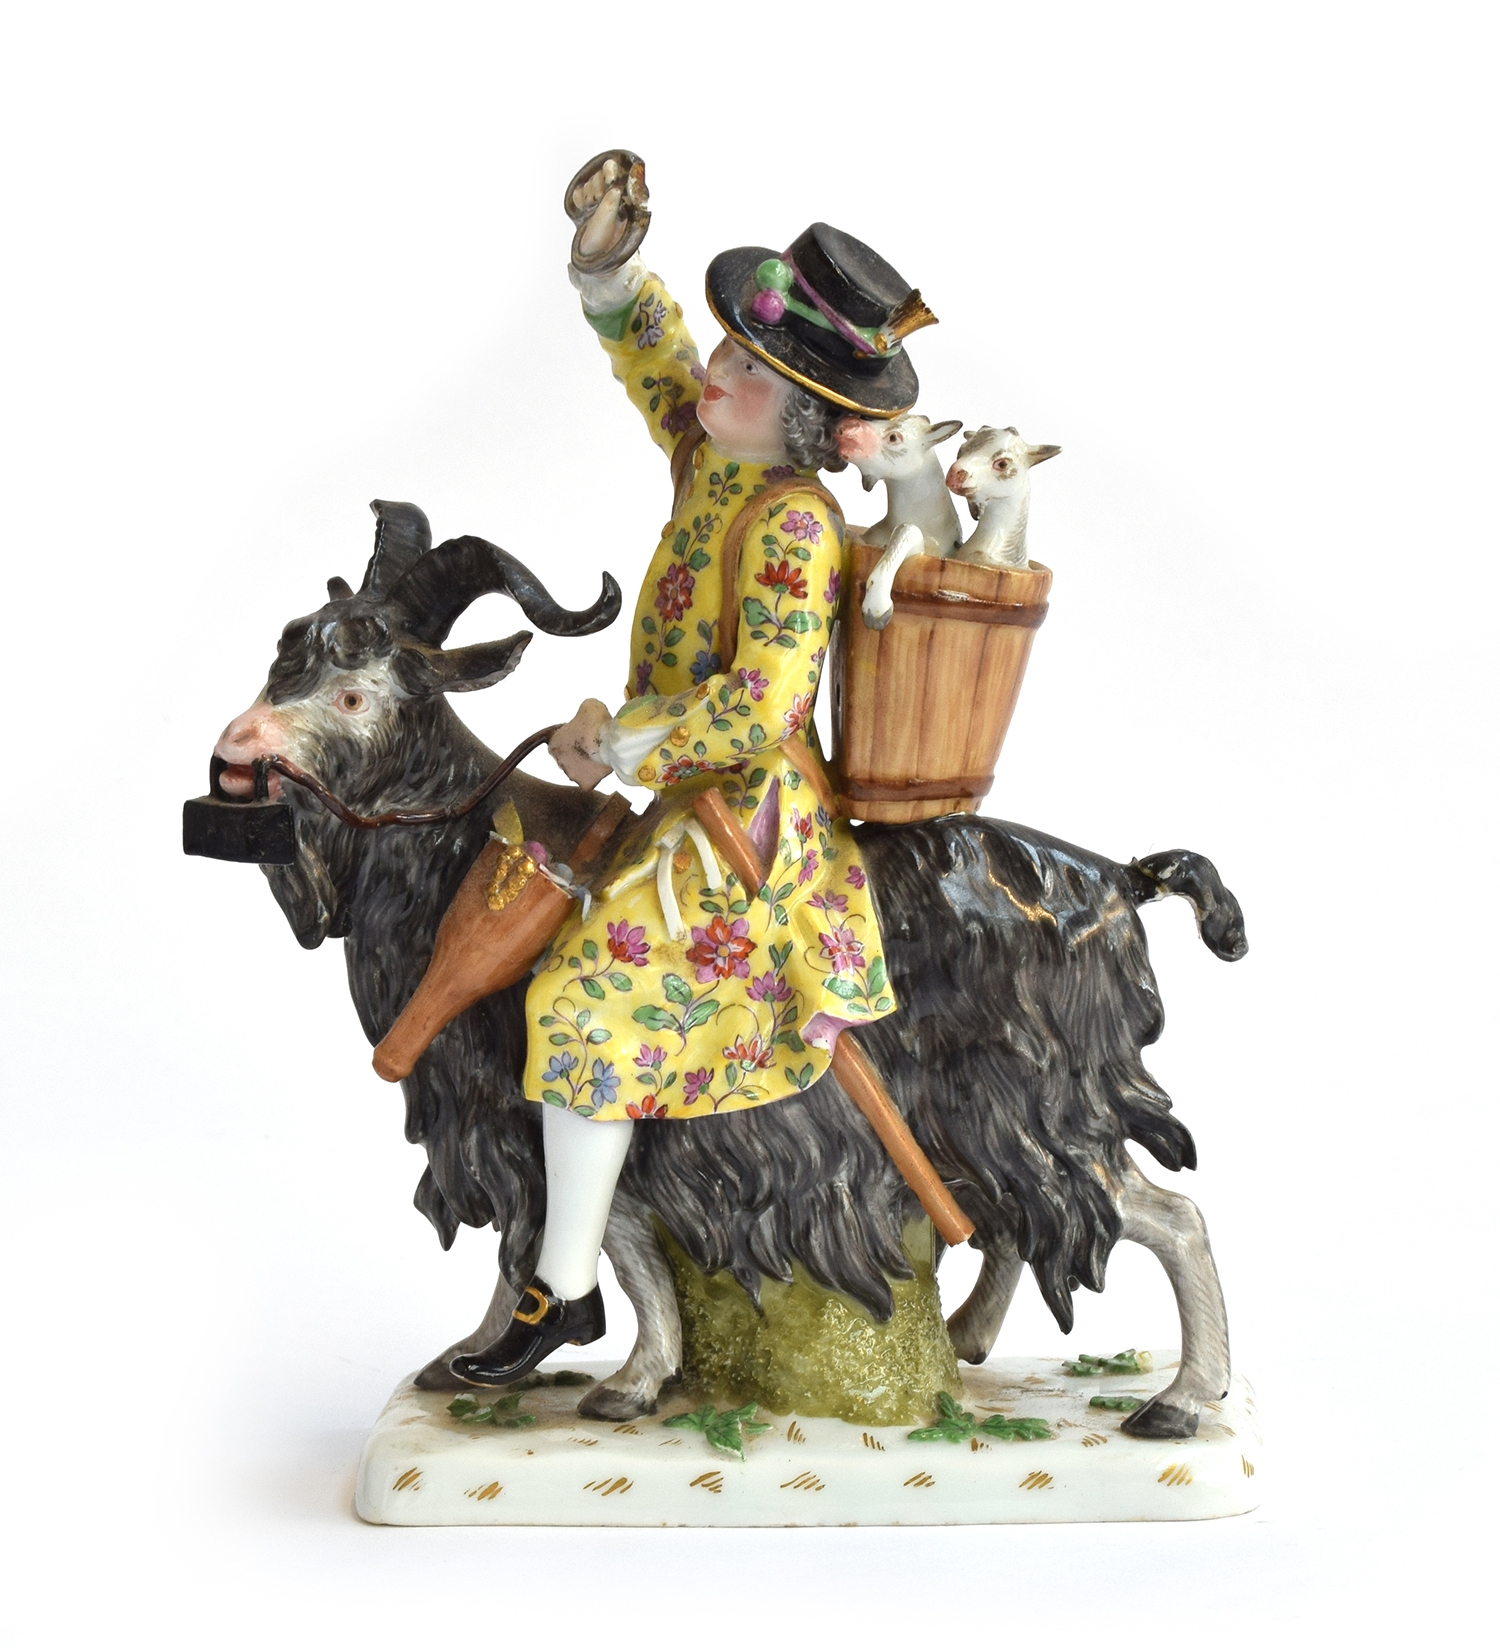 A 19th century Meissen porcelain figure of Count Bruhl's Tailor astride a goat, Meissen crossed